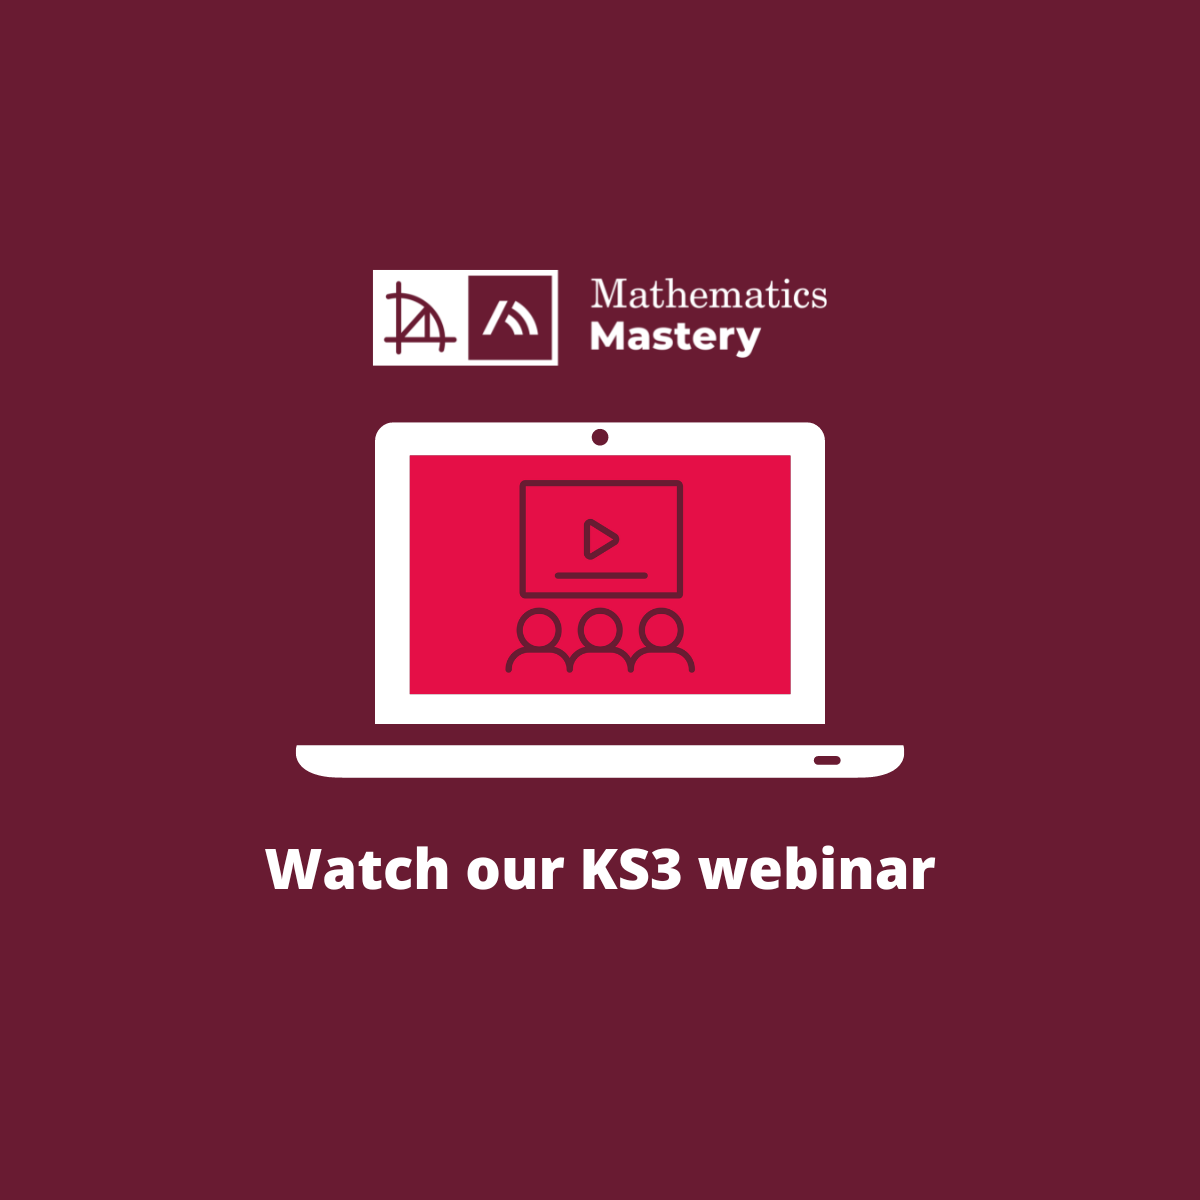 Watch our KS3 webinar: How does Mathematics Mastery align with best practice advocated by the EEF, DFE and NCETM?